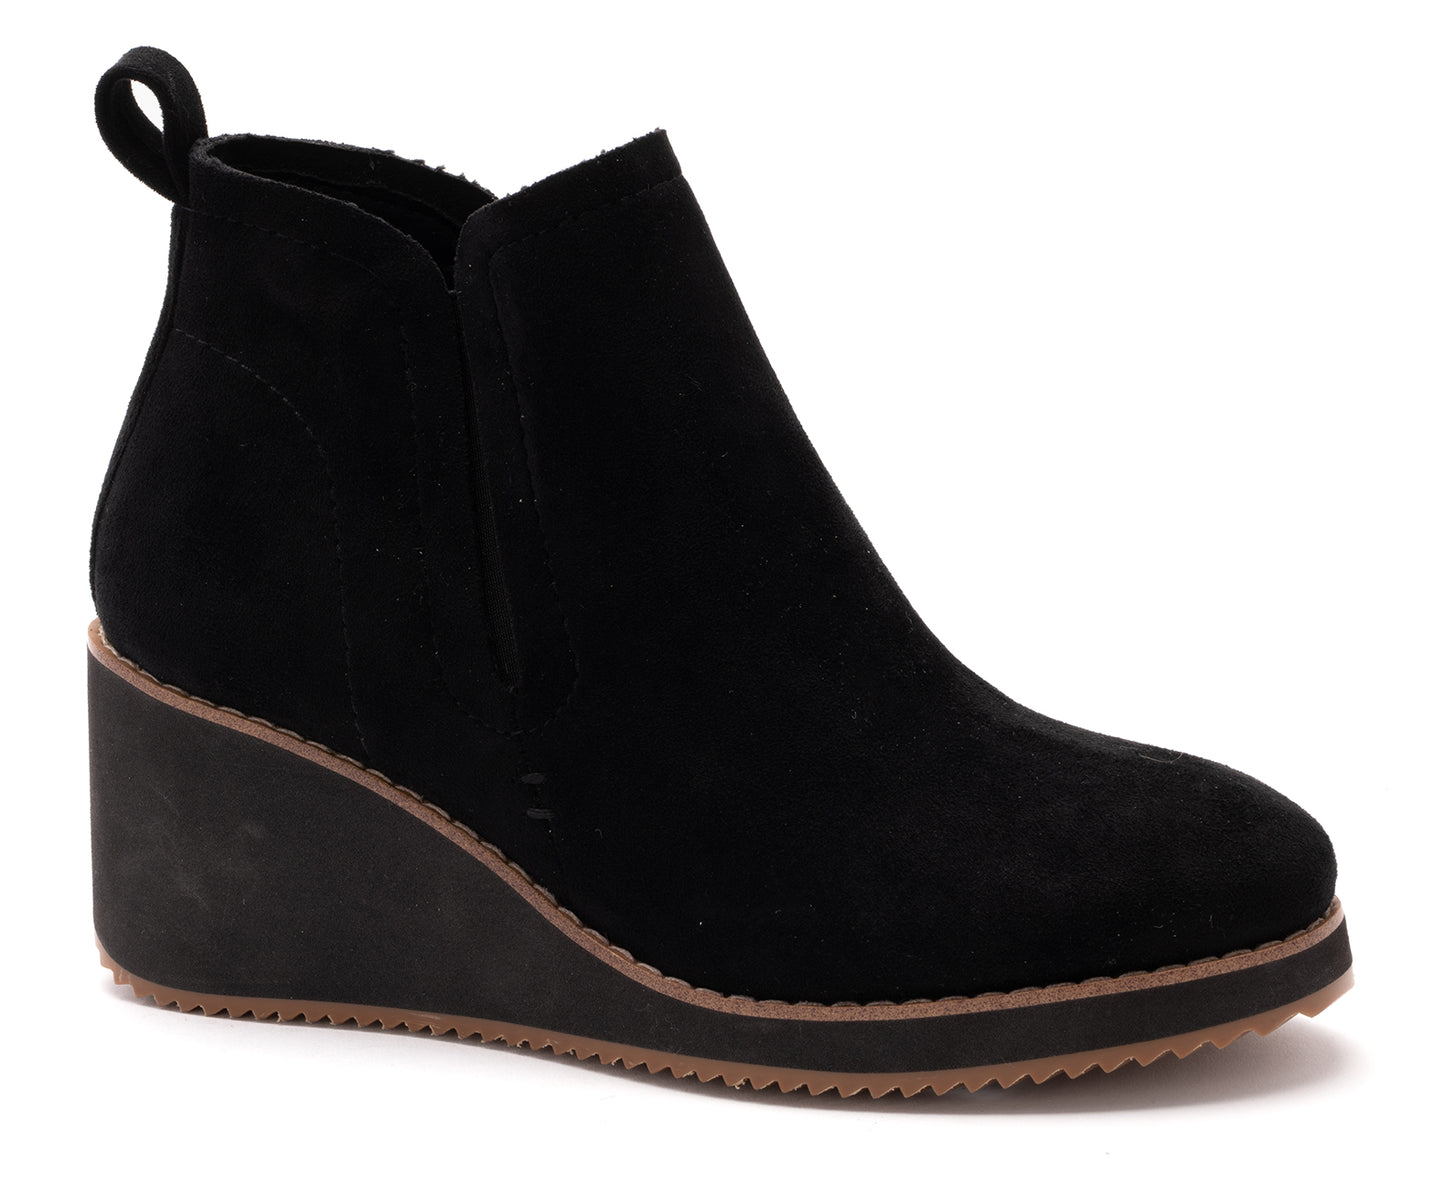 Corkys TOMB Black Suede Boot